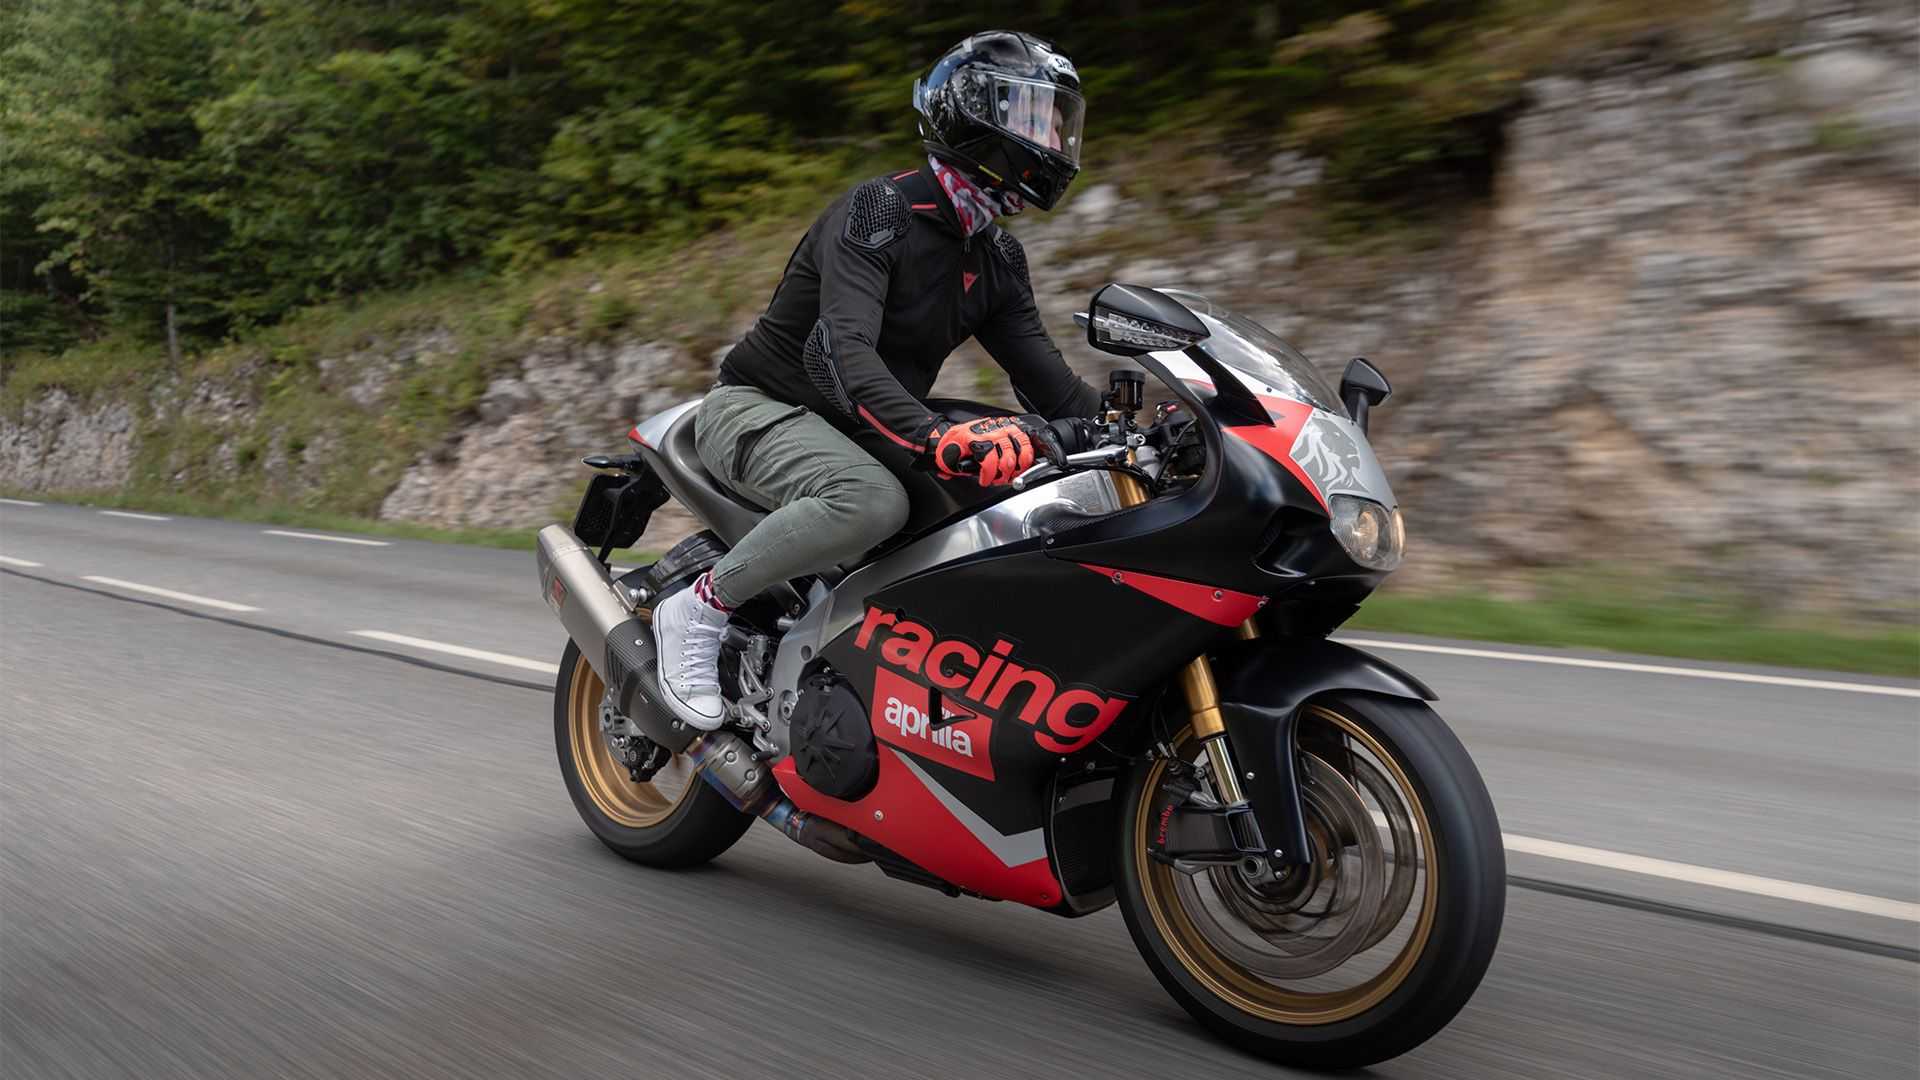 [Street] One motorcycle, two myths, a tribute to the past: an Aprilia RSV4 dressed as an RS 250